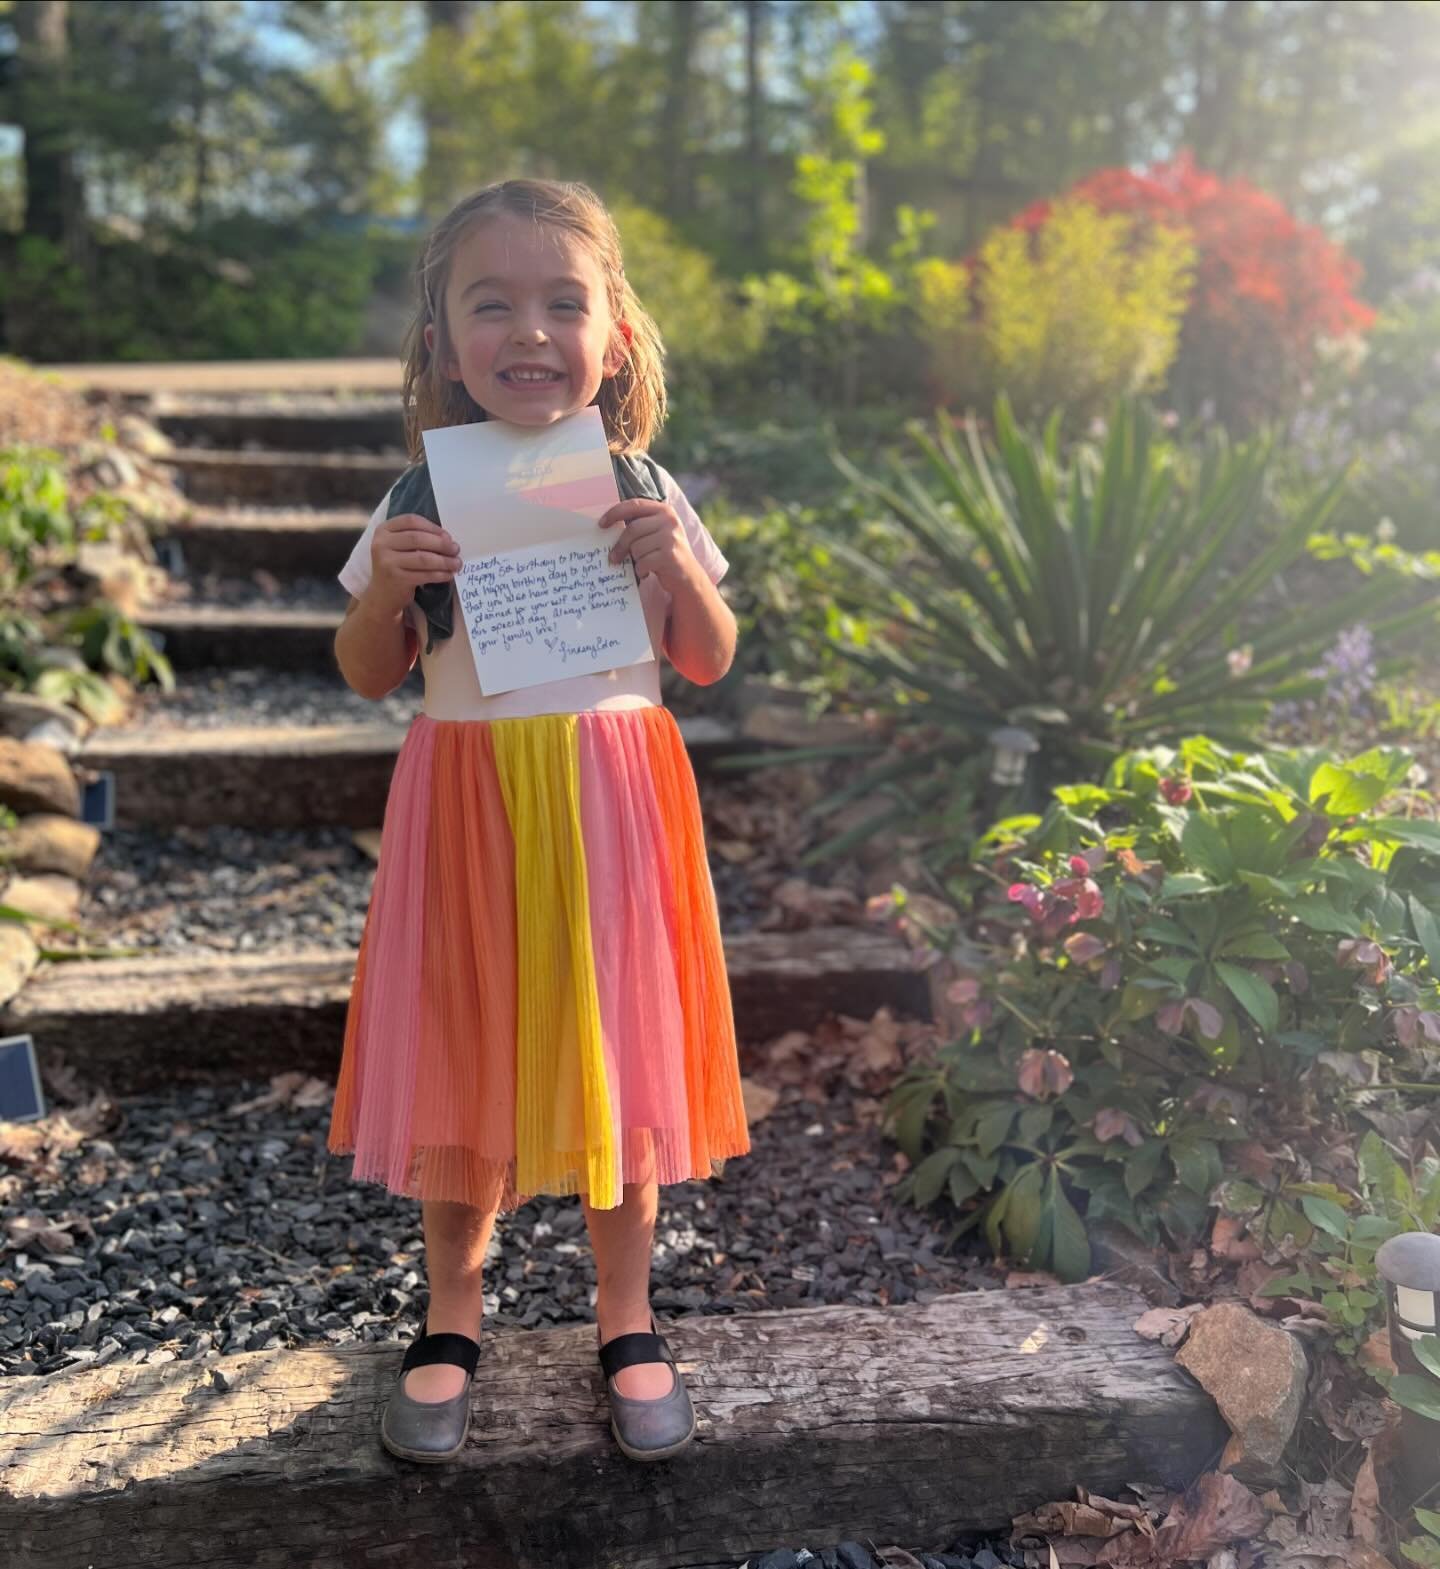 We received the sweetest note from our friend and Denver-doula, @lindsey_eden_photography, commemorating 5 years(!) since Margot&rsquo;s magical birth-day. 

Her message was a reminder to pause and reflect on all that has unfolded since 2019, and how